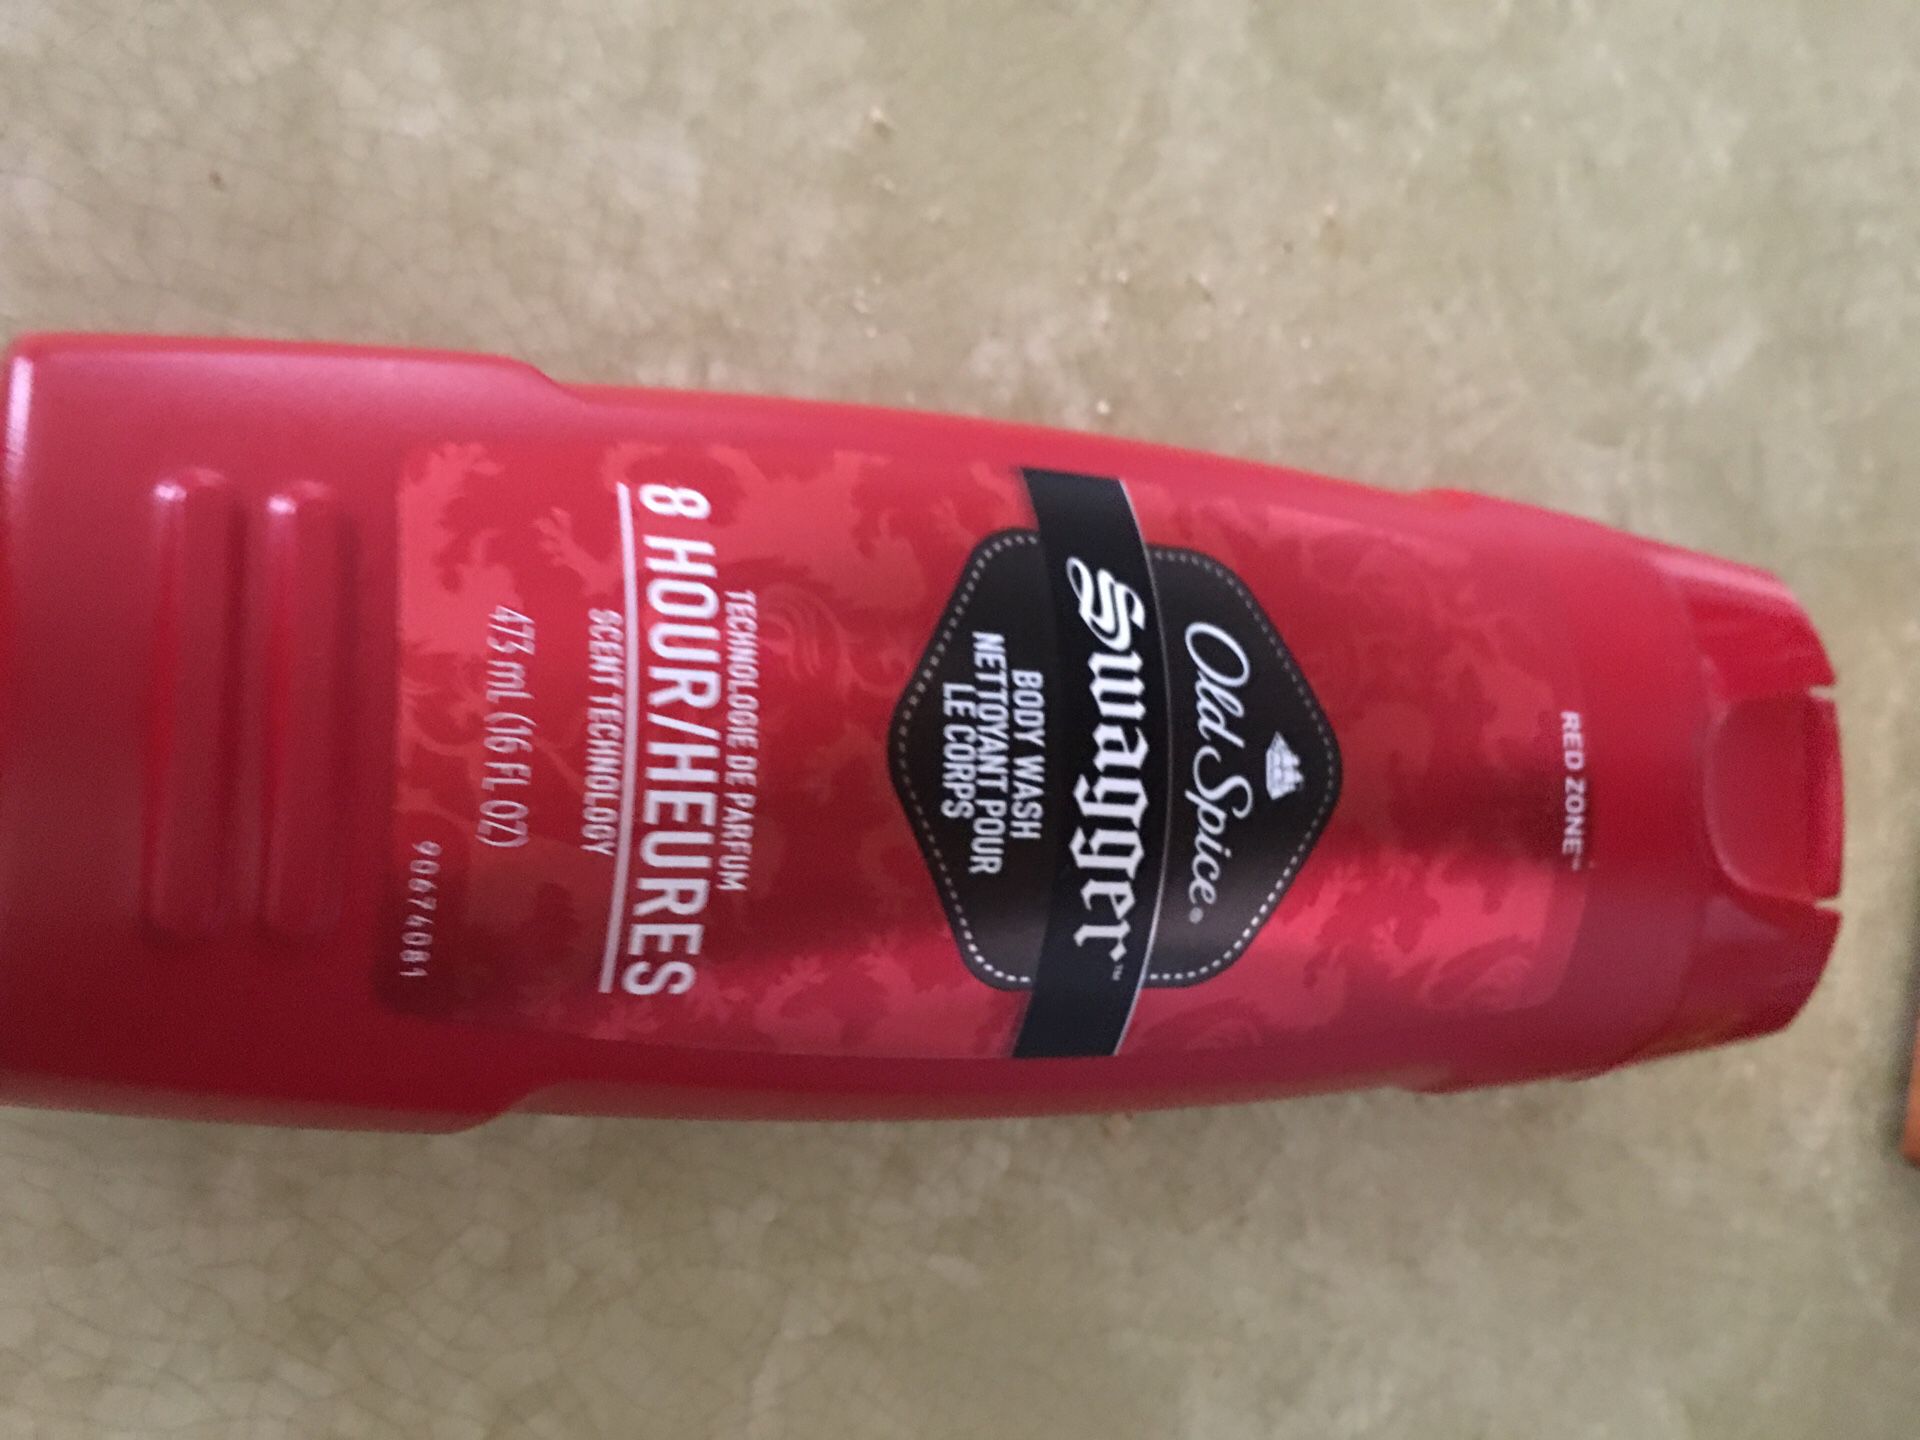 Old spice red zone swagger body wash